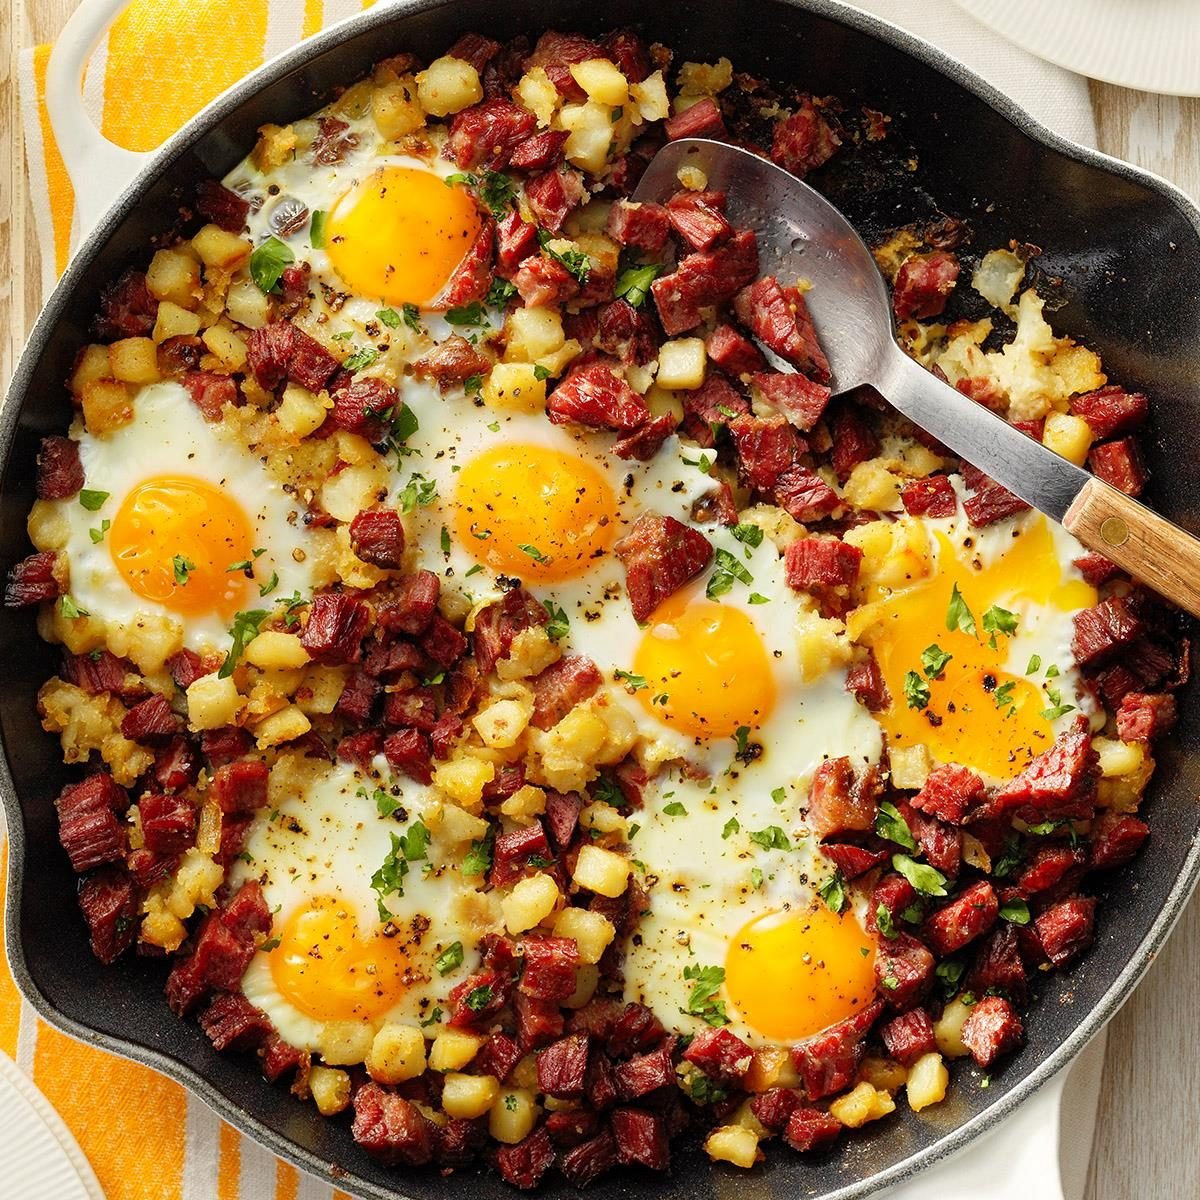 Corned Beef Hash Recipe: How to Make It